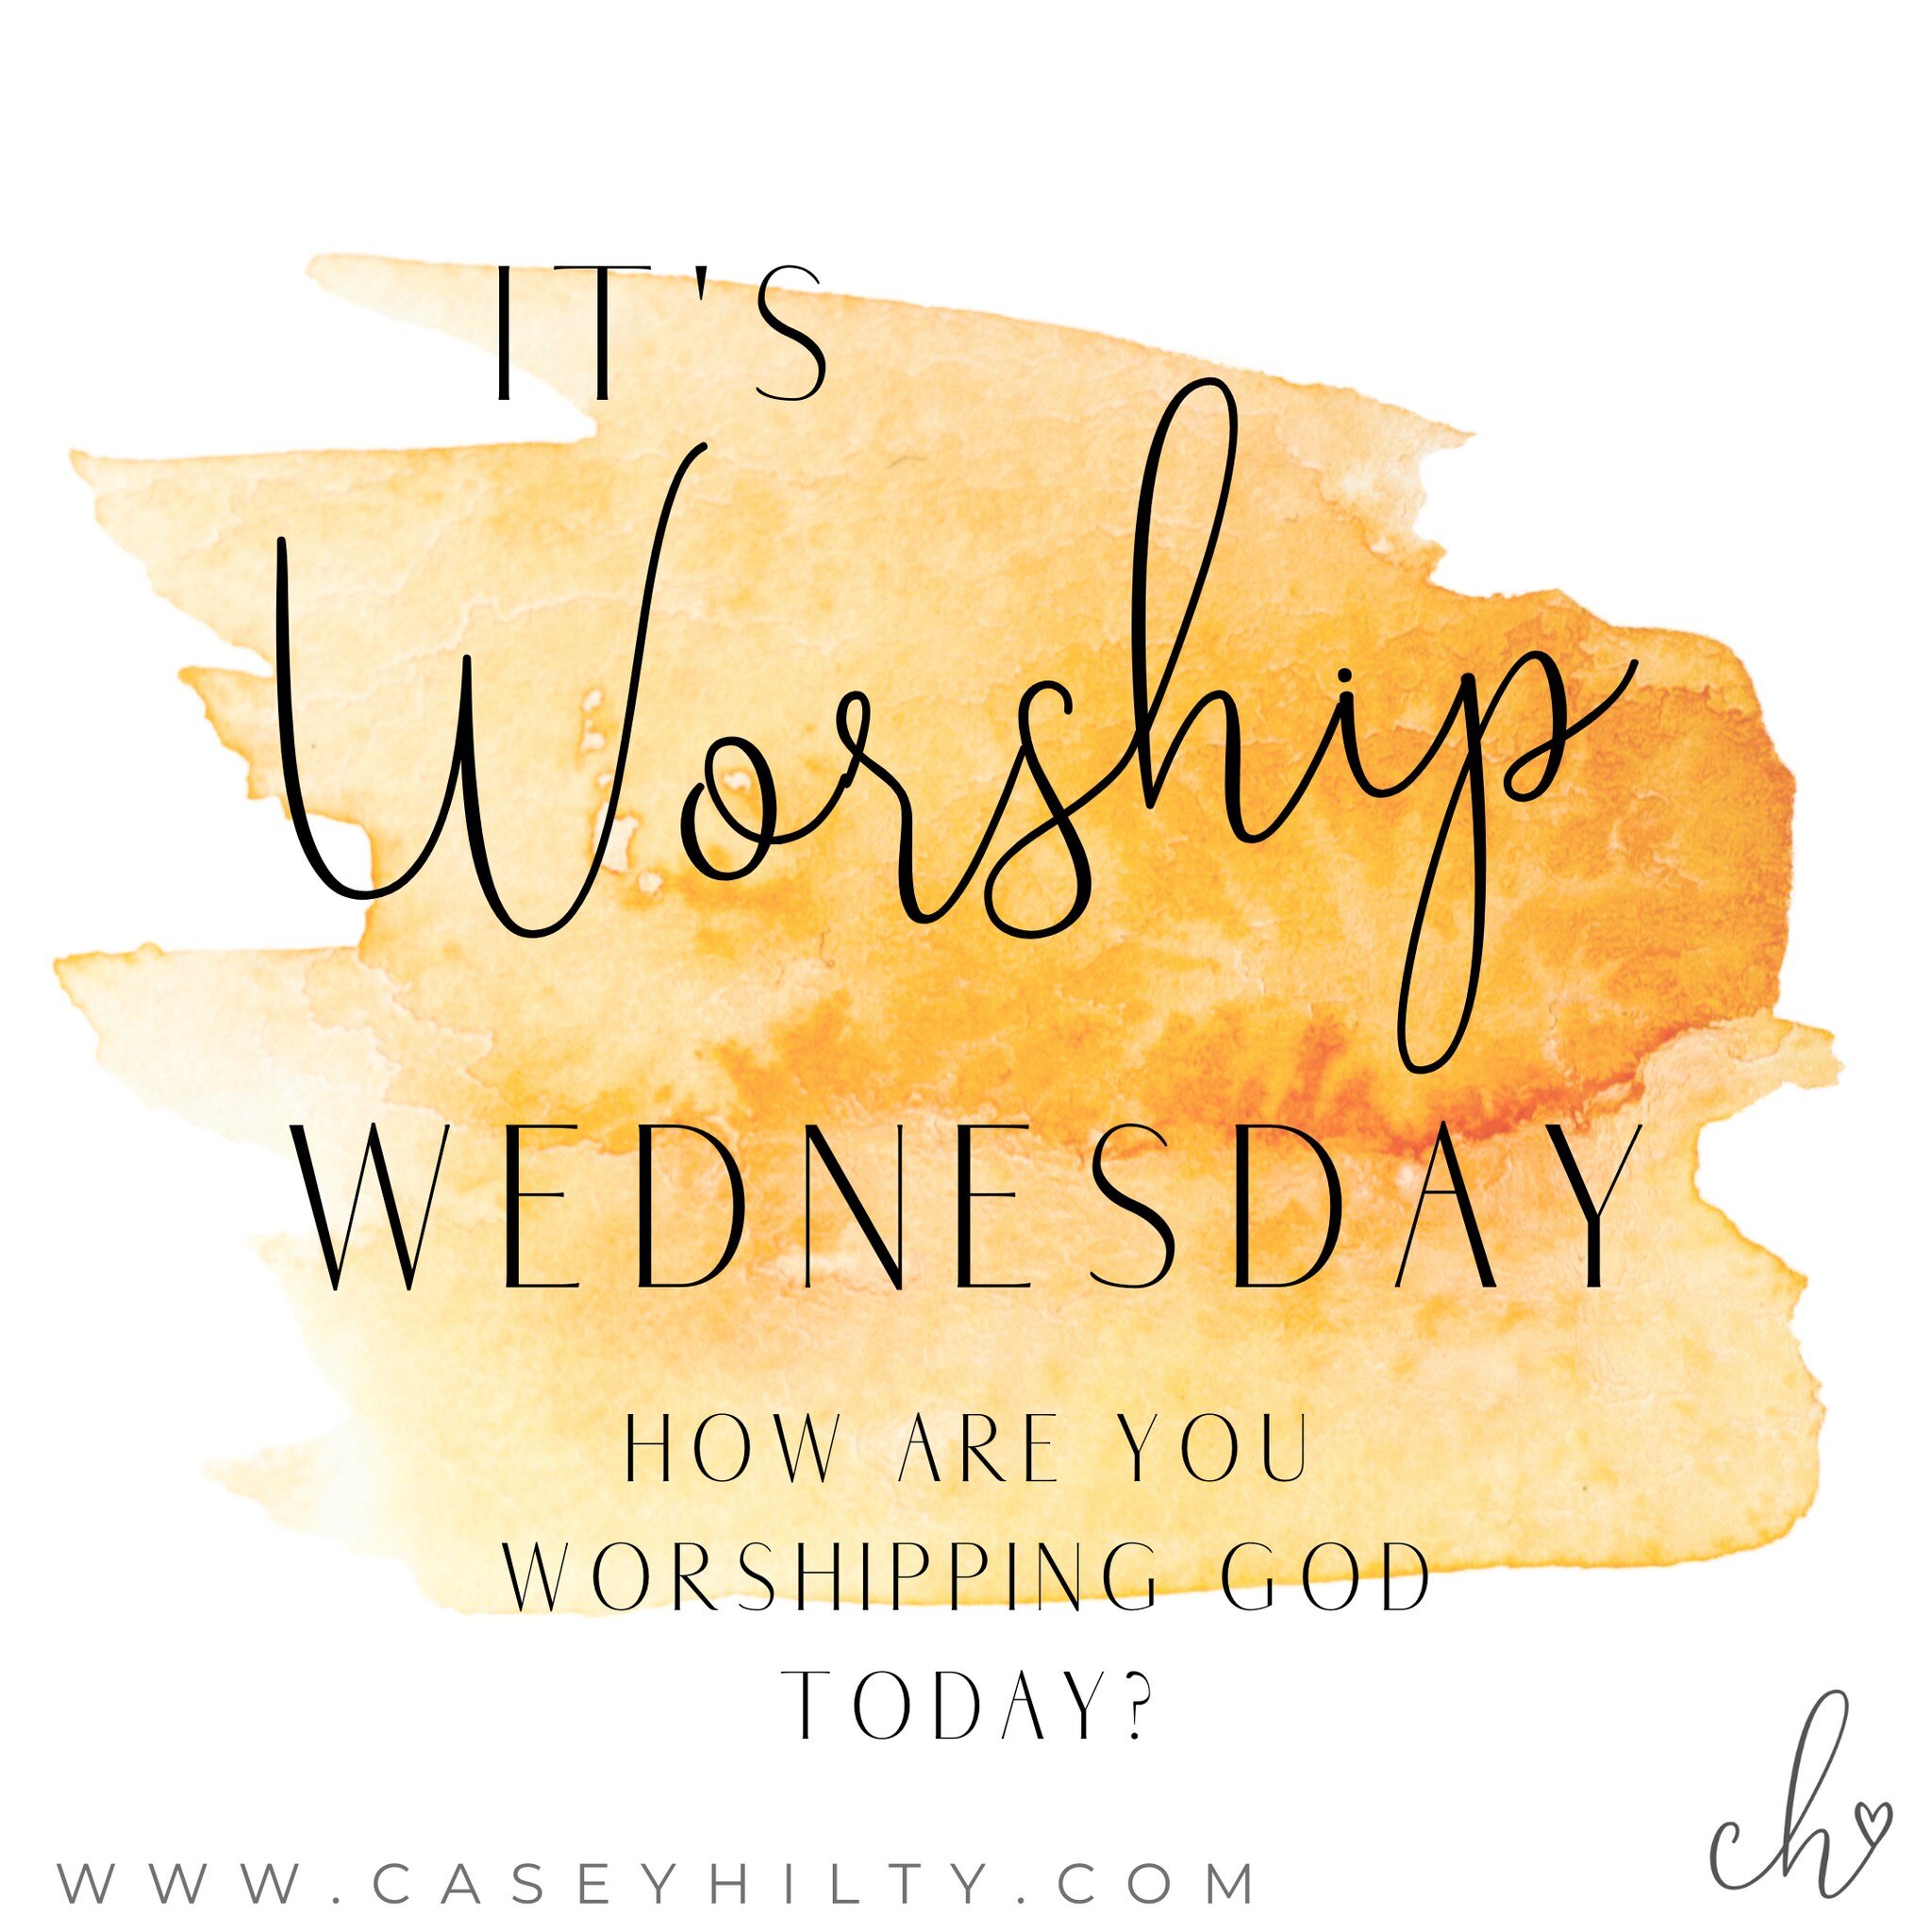 It&rsquo;s Worship Wednesday! Worship is about the posture of our hearts. Even everyday tasks can become worship when we aim to do things for the glory of God. Let your kids choose how they would like to worship God today. Dance party? Paint or color